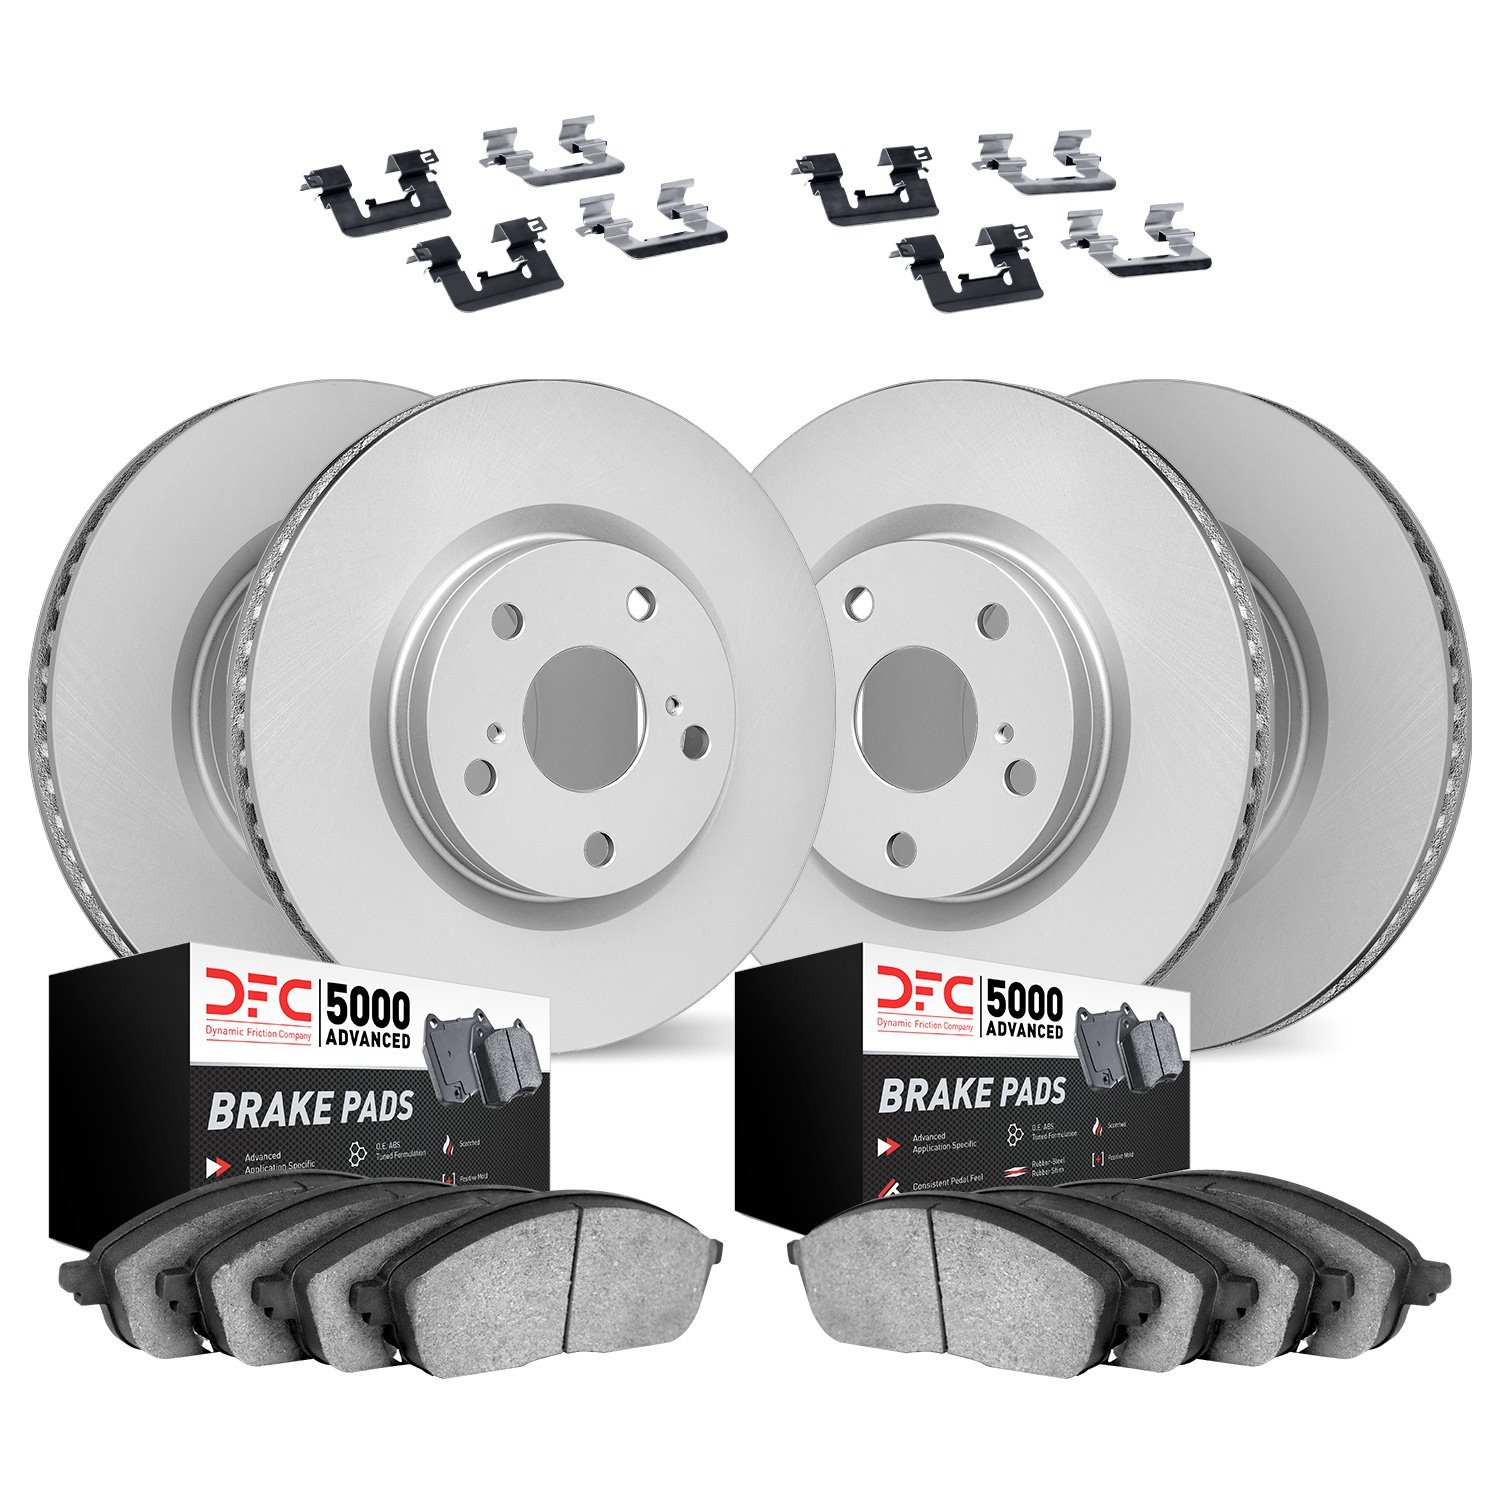 4514-63098 Geospec Brake Rotors w/5000 Advanced Brake Pads Kit & Hardware, 2019-2019 Mercedes-Benz, Position: Front and Rear